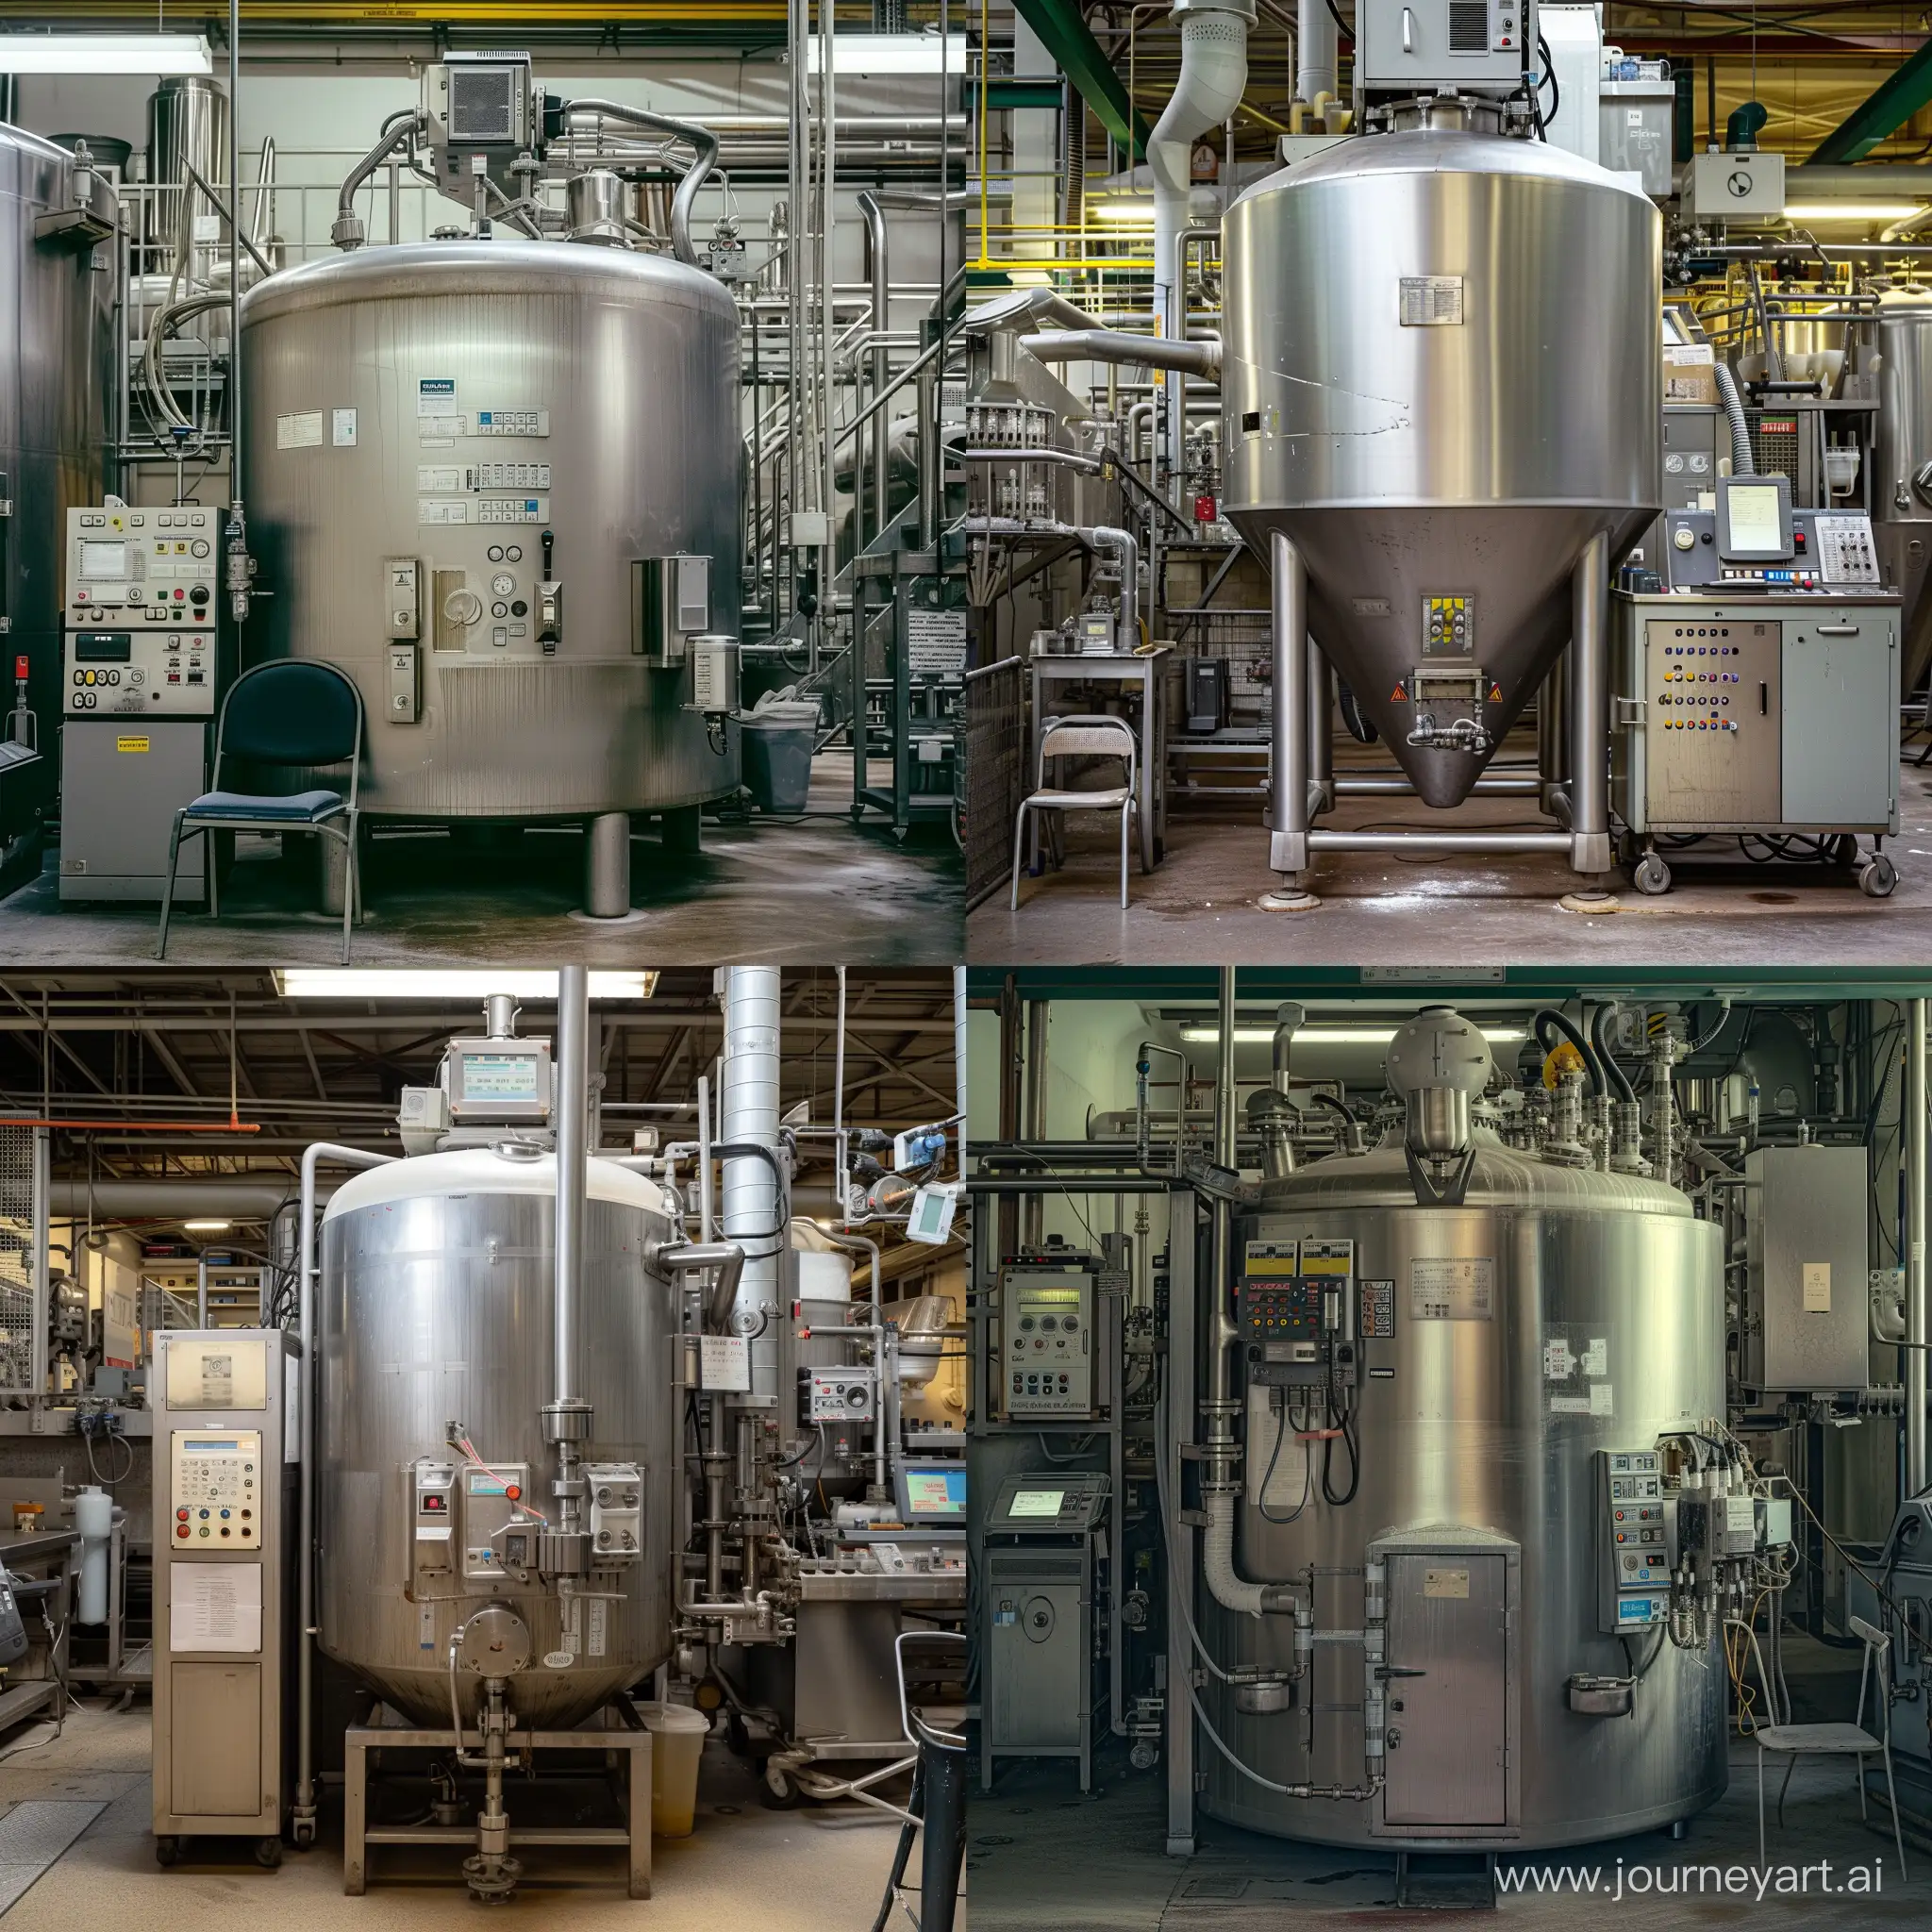 This photo shows what the inside of a large factory that makes dairy products looks like. The photo shows that there is a huge metal tank in the workshop, which takes up almost all the space. The tank probably stores or processes milk or beer. At the bottom of the photo, you can see that the workshop is clean and tidy, and there are powerful machines working there. According to other sources, the photo shows an installation that makes condensed milk from dry milk. The tank has two funnels, one for sugar and the other for liquid additives. On top of the tank there is a motor that mixes the milk, and on the side of the tank there is a homogenizer that makes the milk homogeneous. Next to the tank there is a cabinet with buttons that controls the installation, and a melter that melts fats. Behind the tank there is a tubular cooler that cools the milk. In addition to the tank, there are several other interesting things on the photo. Next to the tank there is a chair, maybe for the person who works at the factory, and makes the photo more lively. There are also many other machines on the photo, which look complex and have many details, such as pipes, funnels and buttons. On one of the machines there is a sign, maybe it is the name of the machine or the factory. In general, the photo gives an idea of how a modern factory that processes milk and produces condensed milk with sugar works